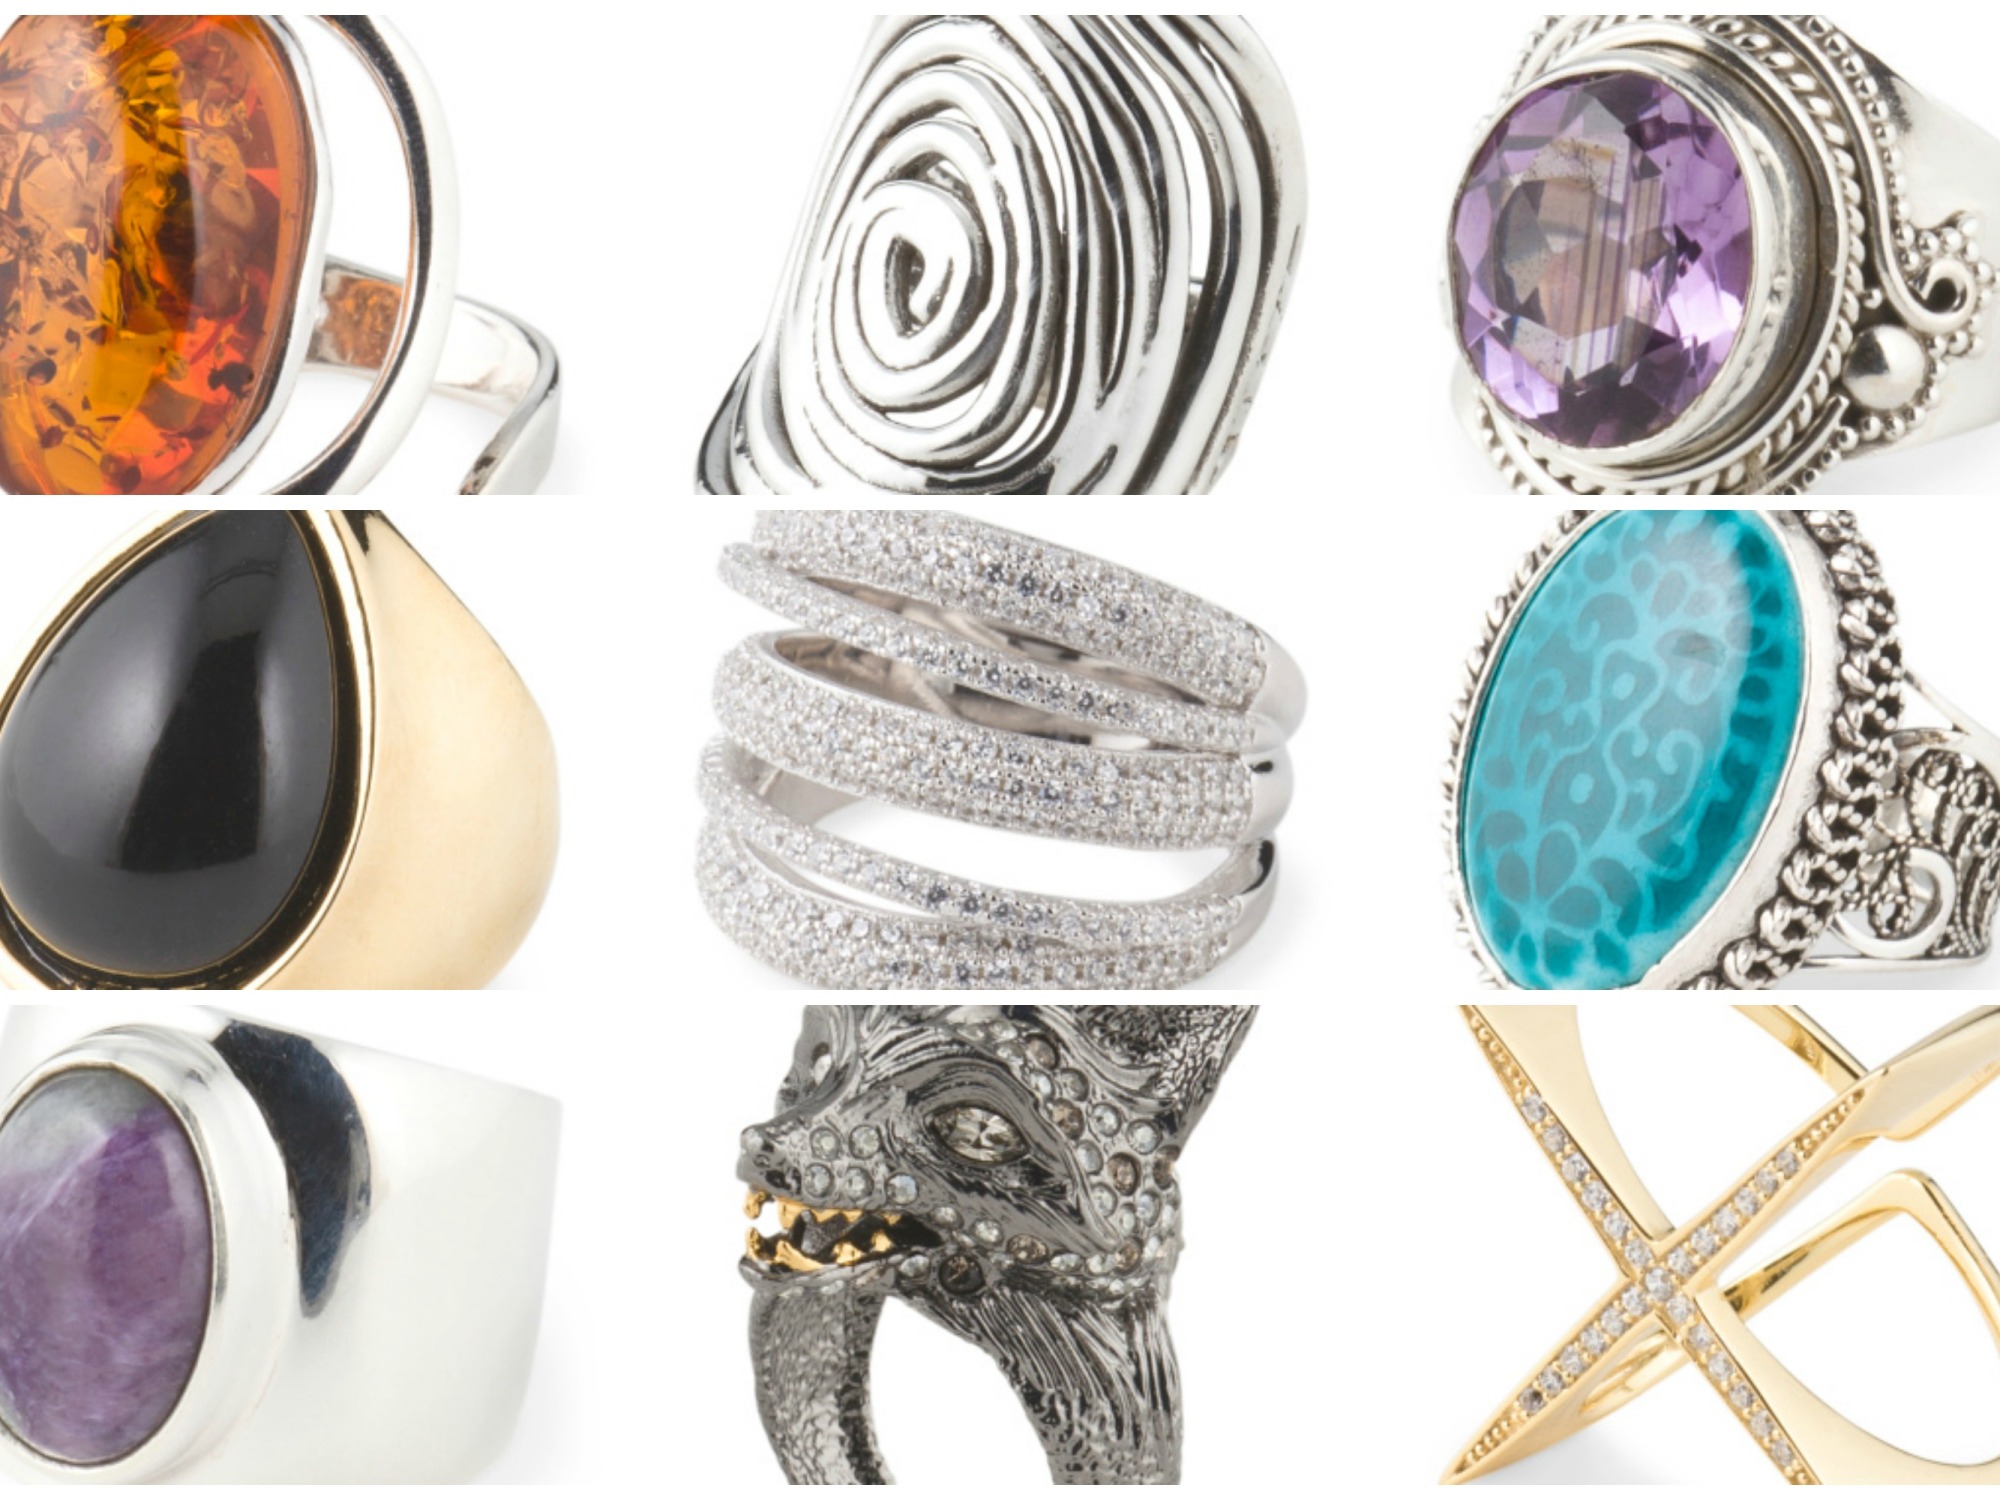 10 tips for shopping for jewelry at T.J. Maxx – Iva Jewel